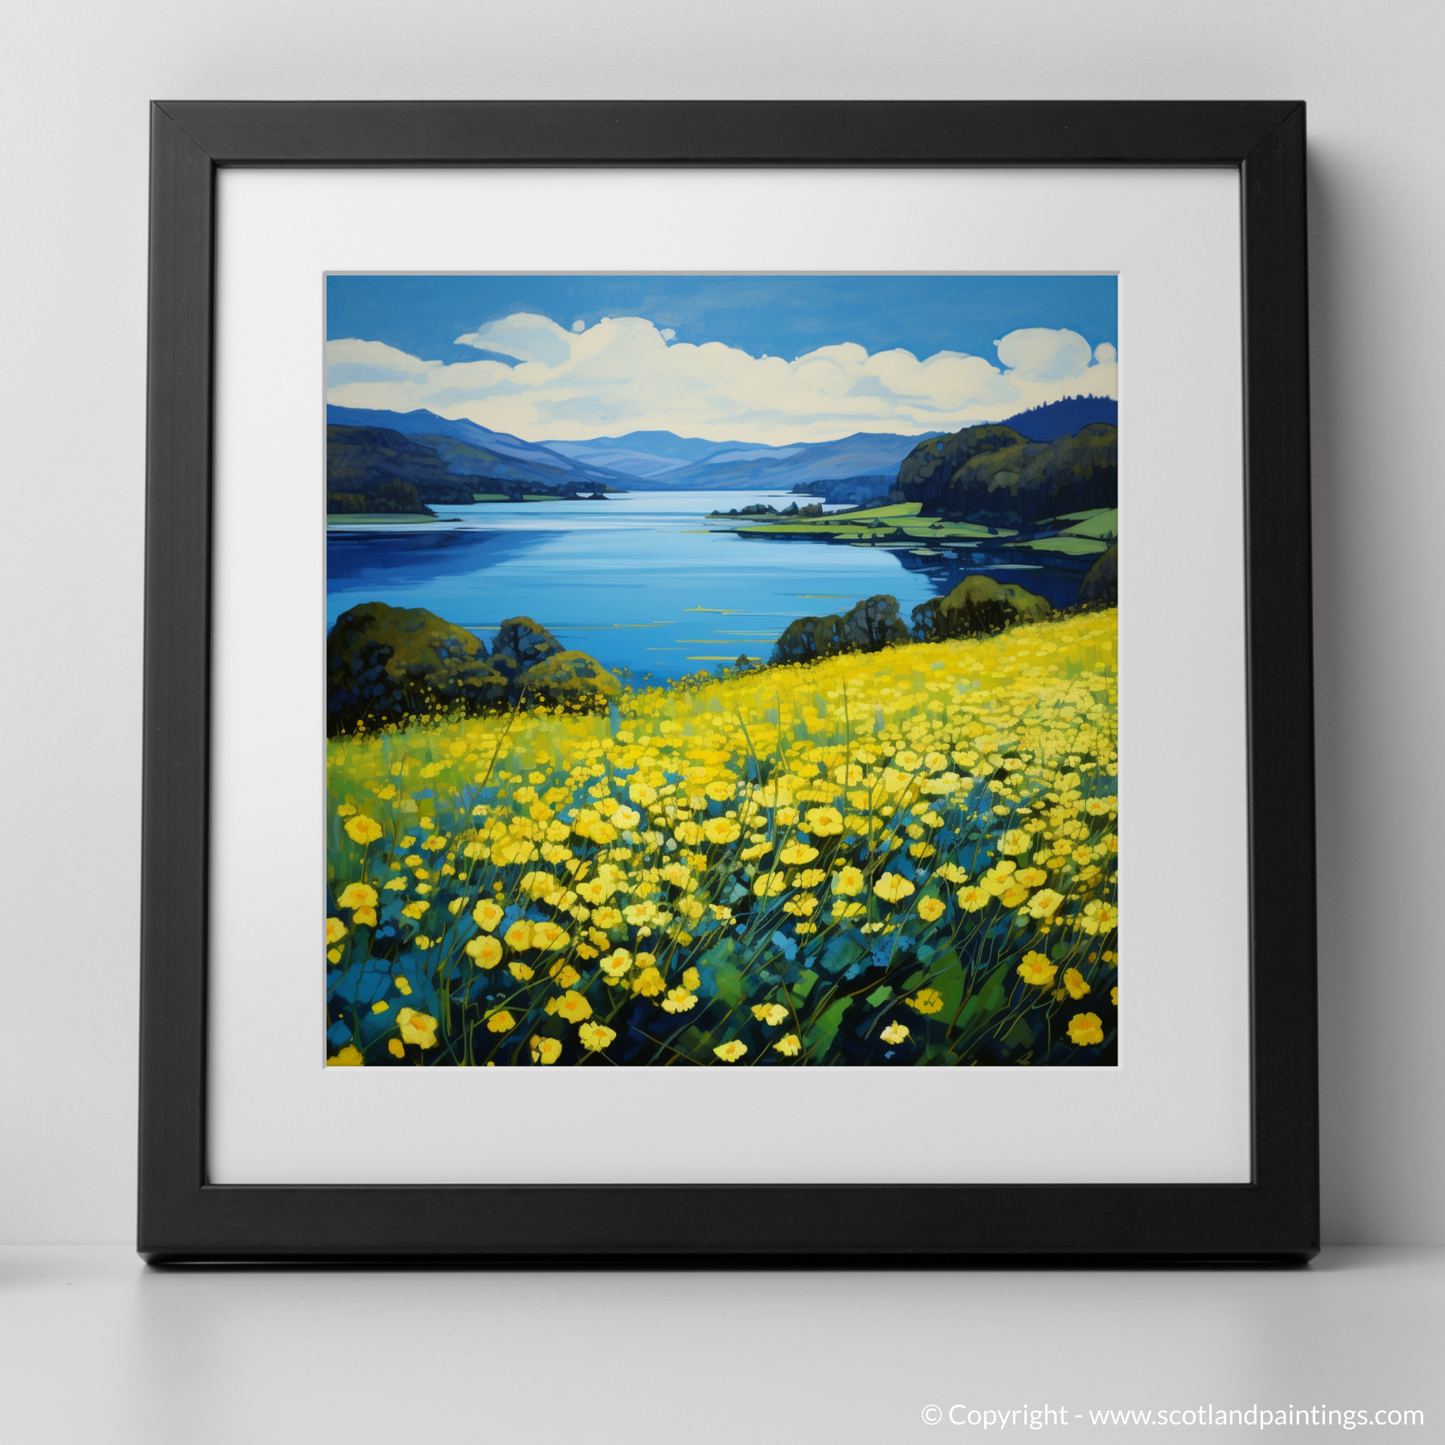 Loch Tay's Lesser Celandine: A Color Field Ode to Scottish Spring